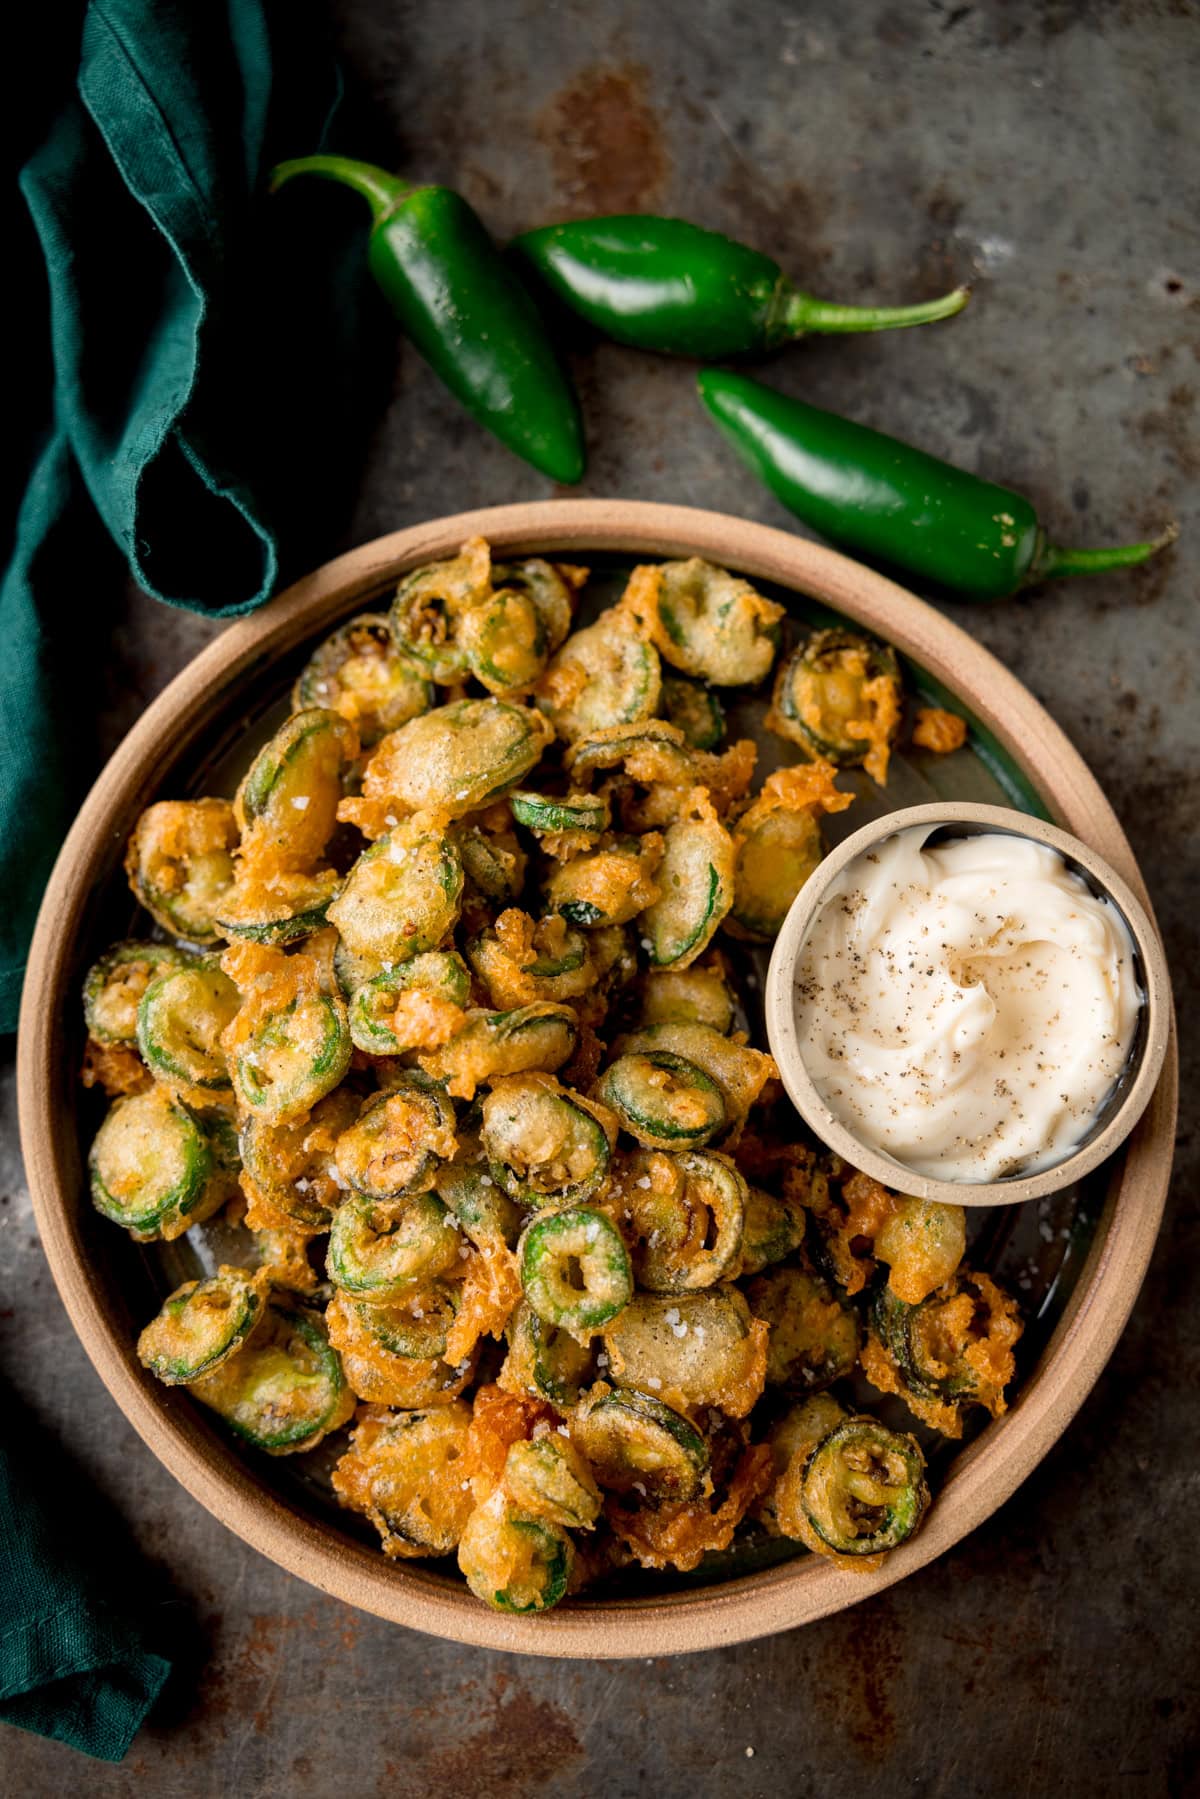 A tall, overhead image of a light brown bowl of fried Jalapenos. In the top right of the bowl, there is a light grey dish nestled in the fried Jalapenos, which has garlic mayo in it. In the top left of the background, there is a dark green napkin. In the top middle of the background, you can see three fresh, green Jalapenos next to each other. This is all set on a grey surface.